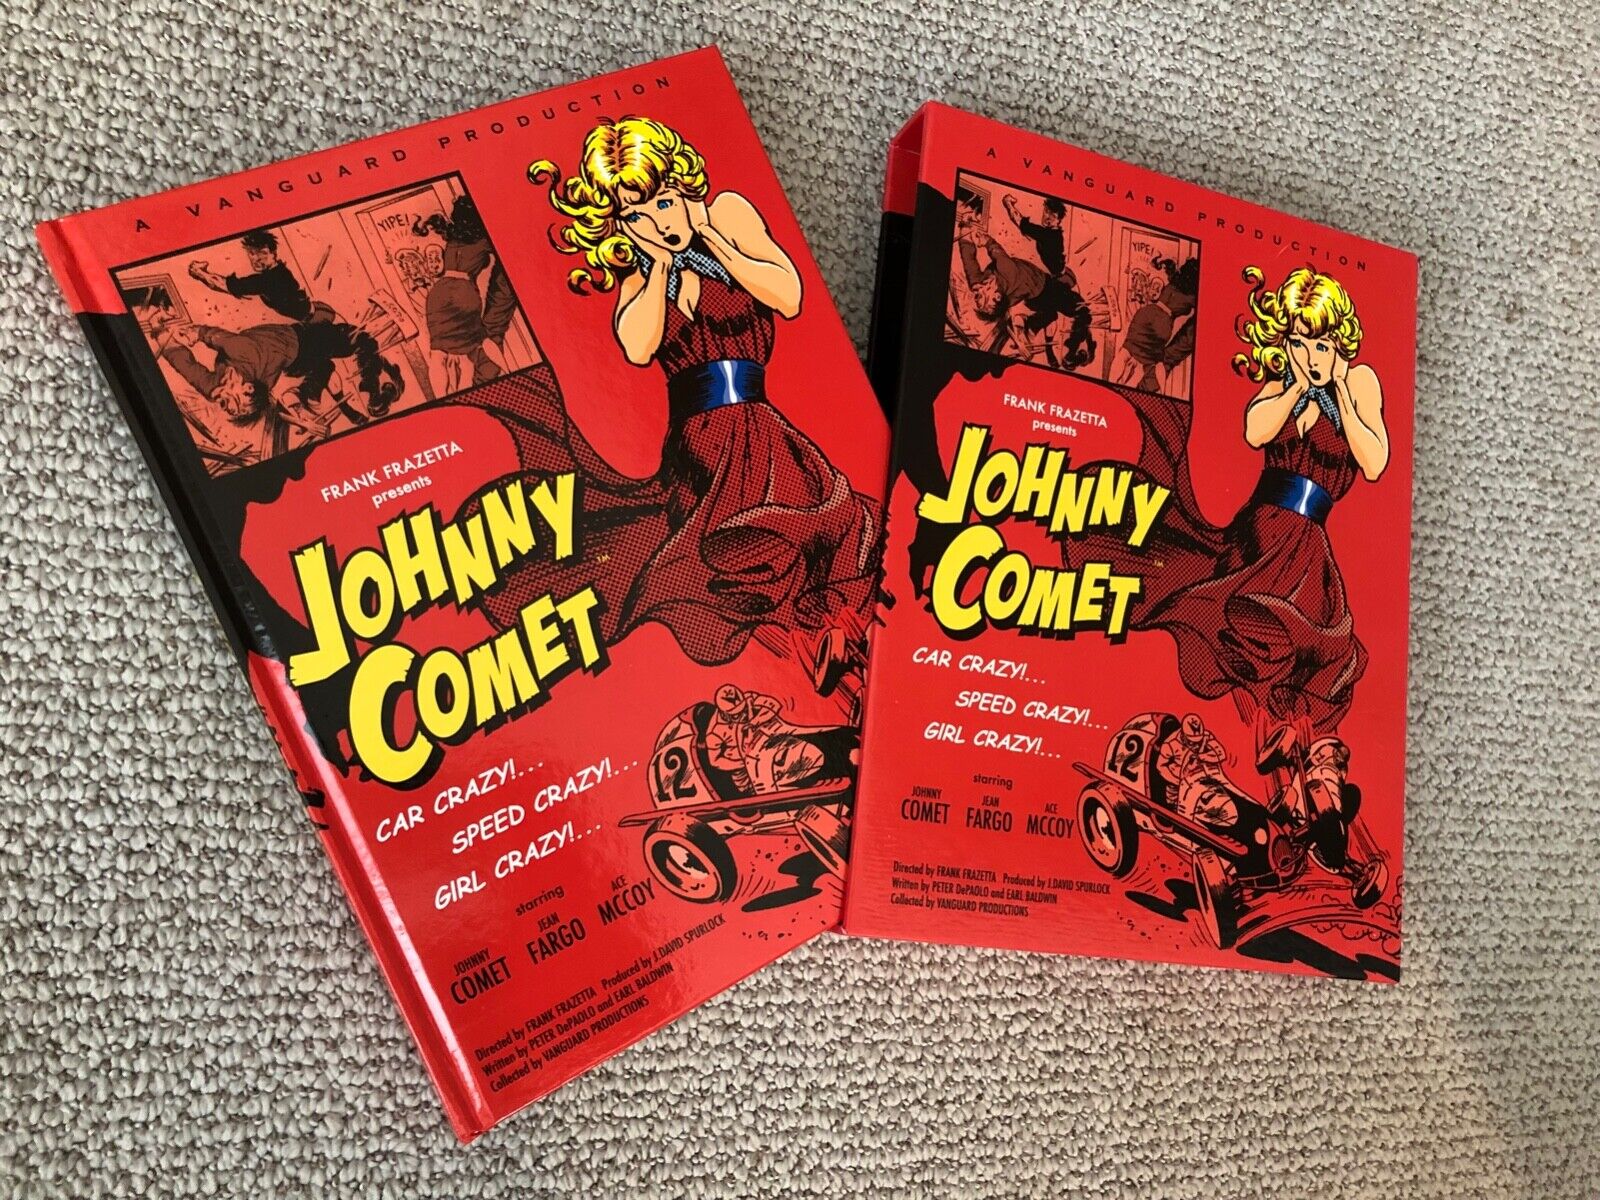 Frank Frazzeta's Johnny Comet - leaving this week if not sold